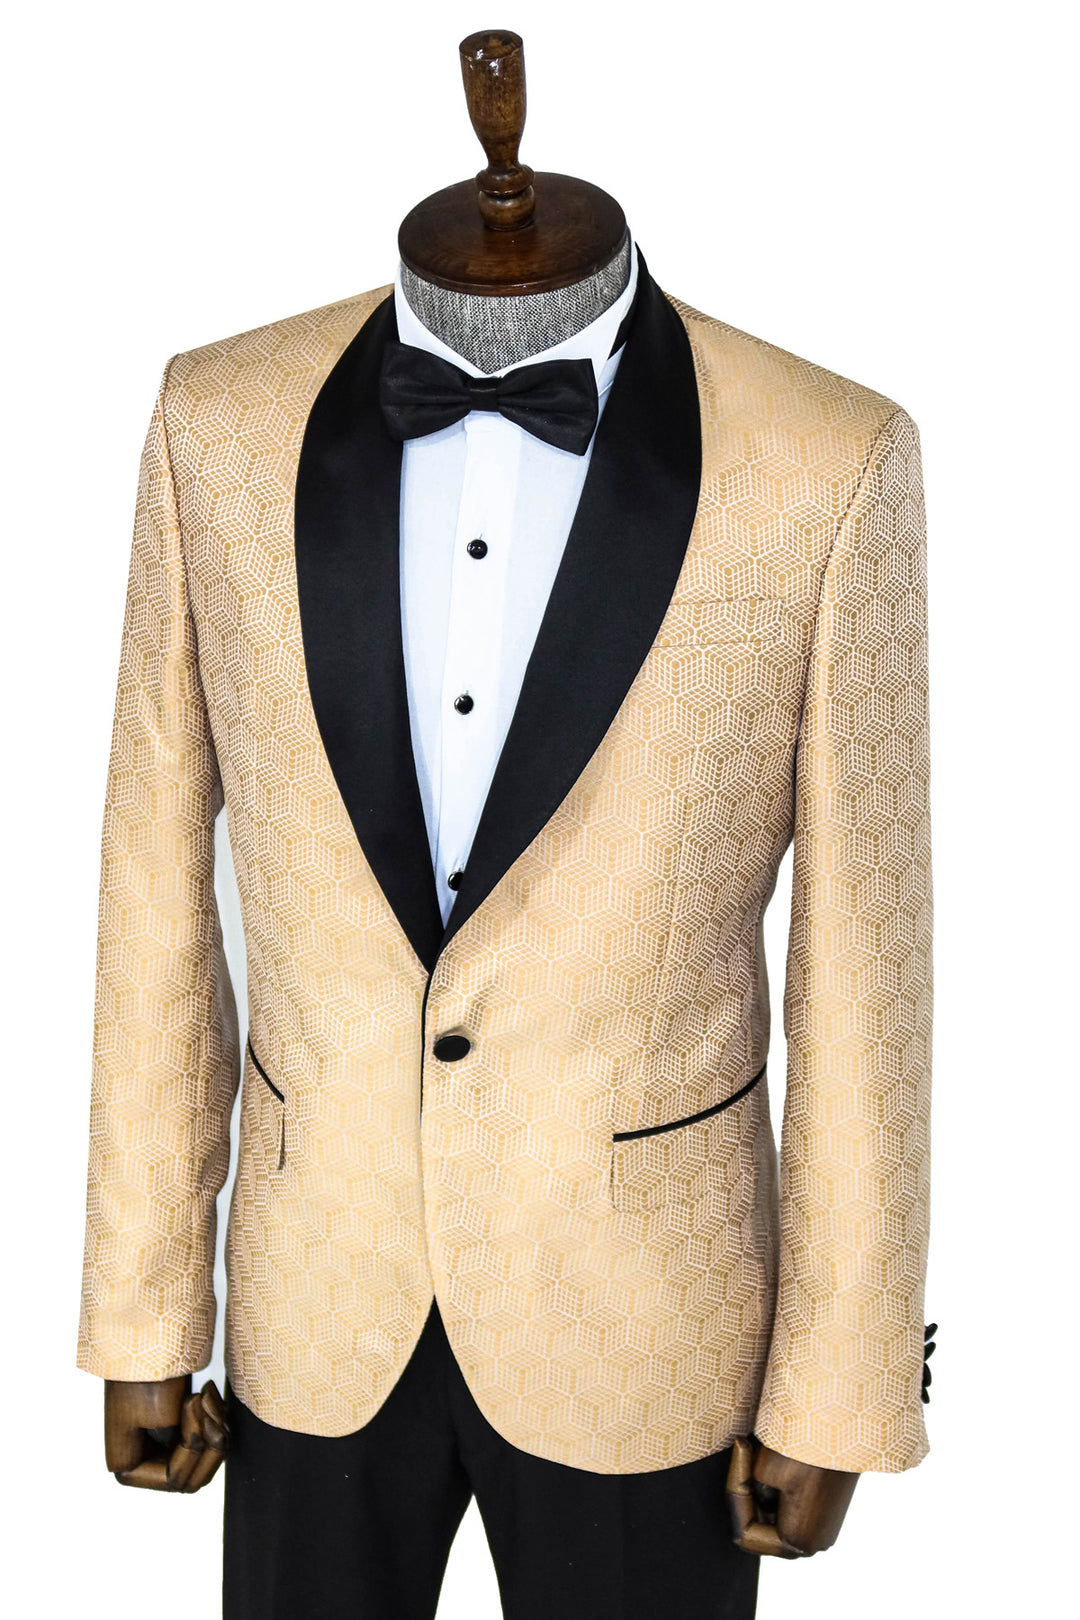 Pentagon Patterned Shawl Lapel Cream Men Prom Blazer  and Trousers Combination- Wessi